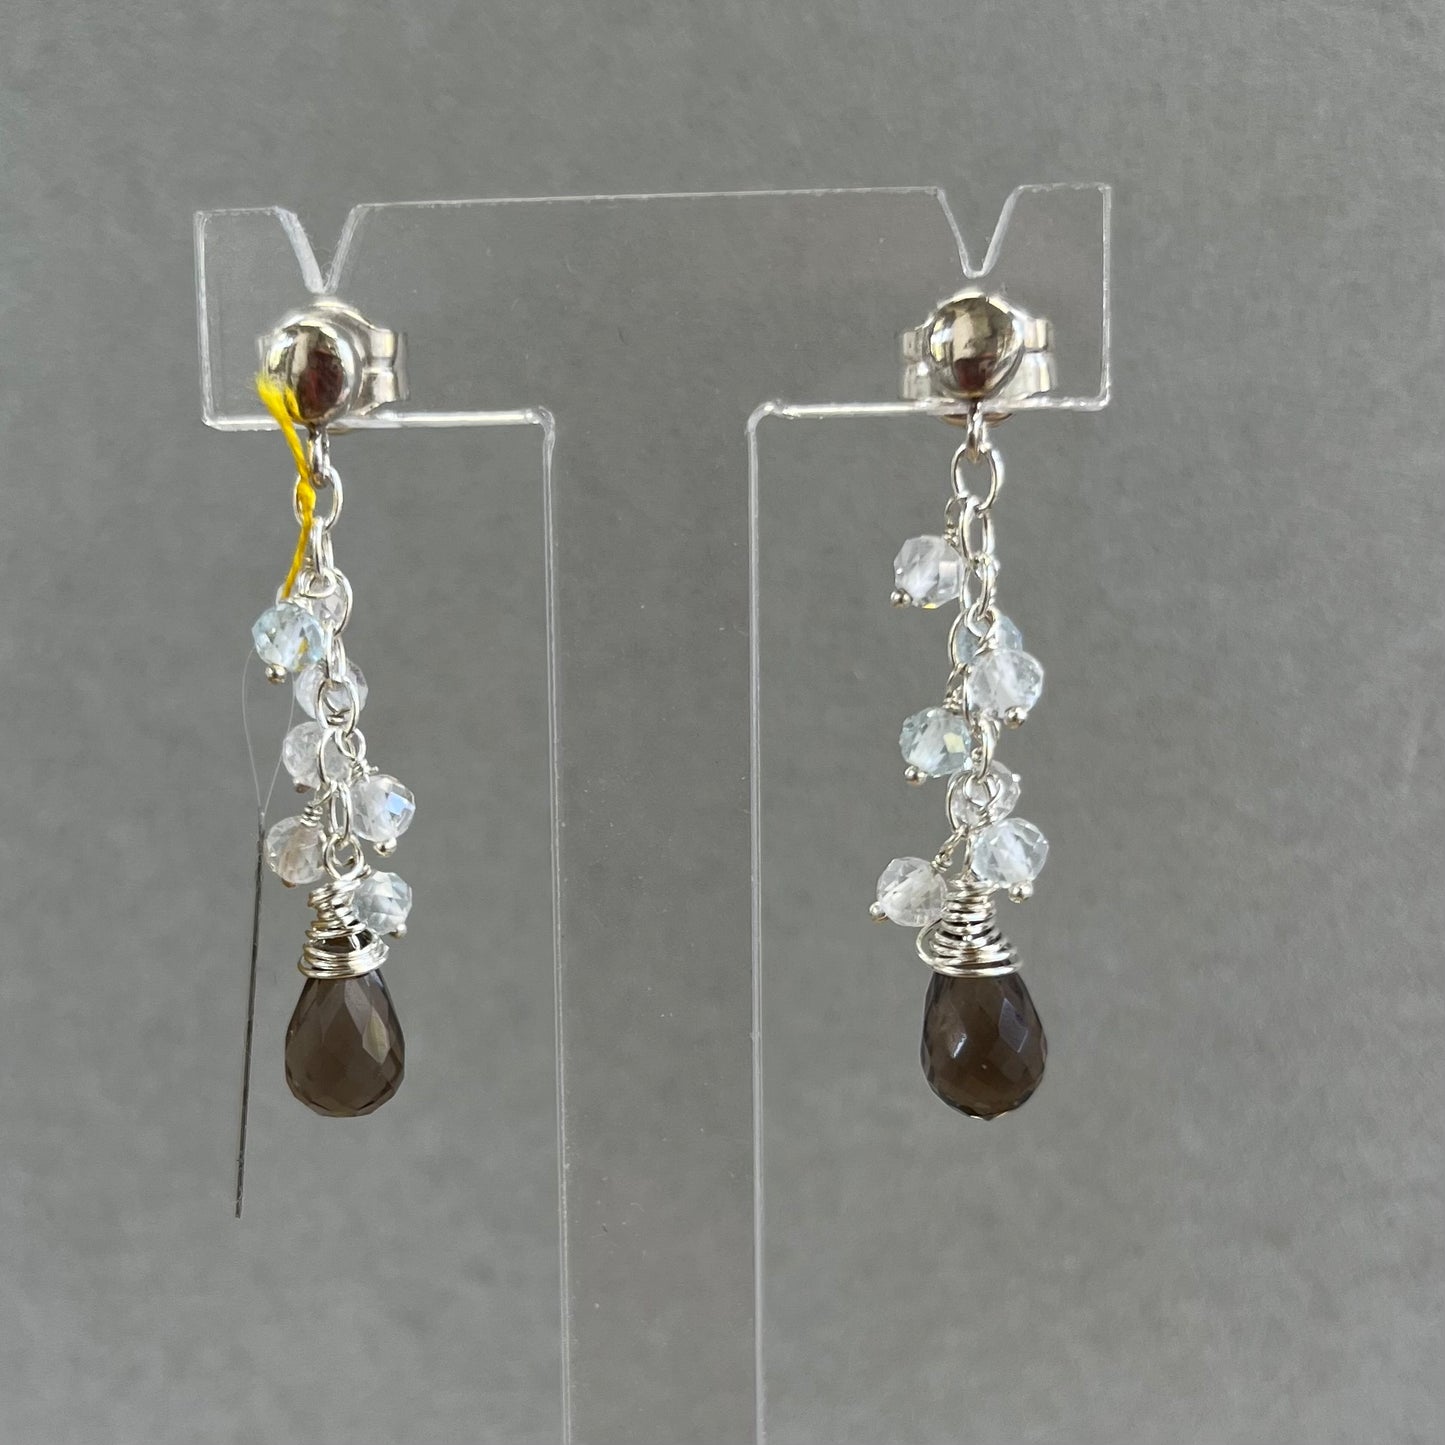 Earrings with smoky quartz and topaz